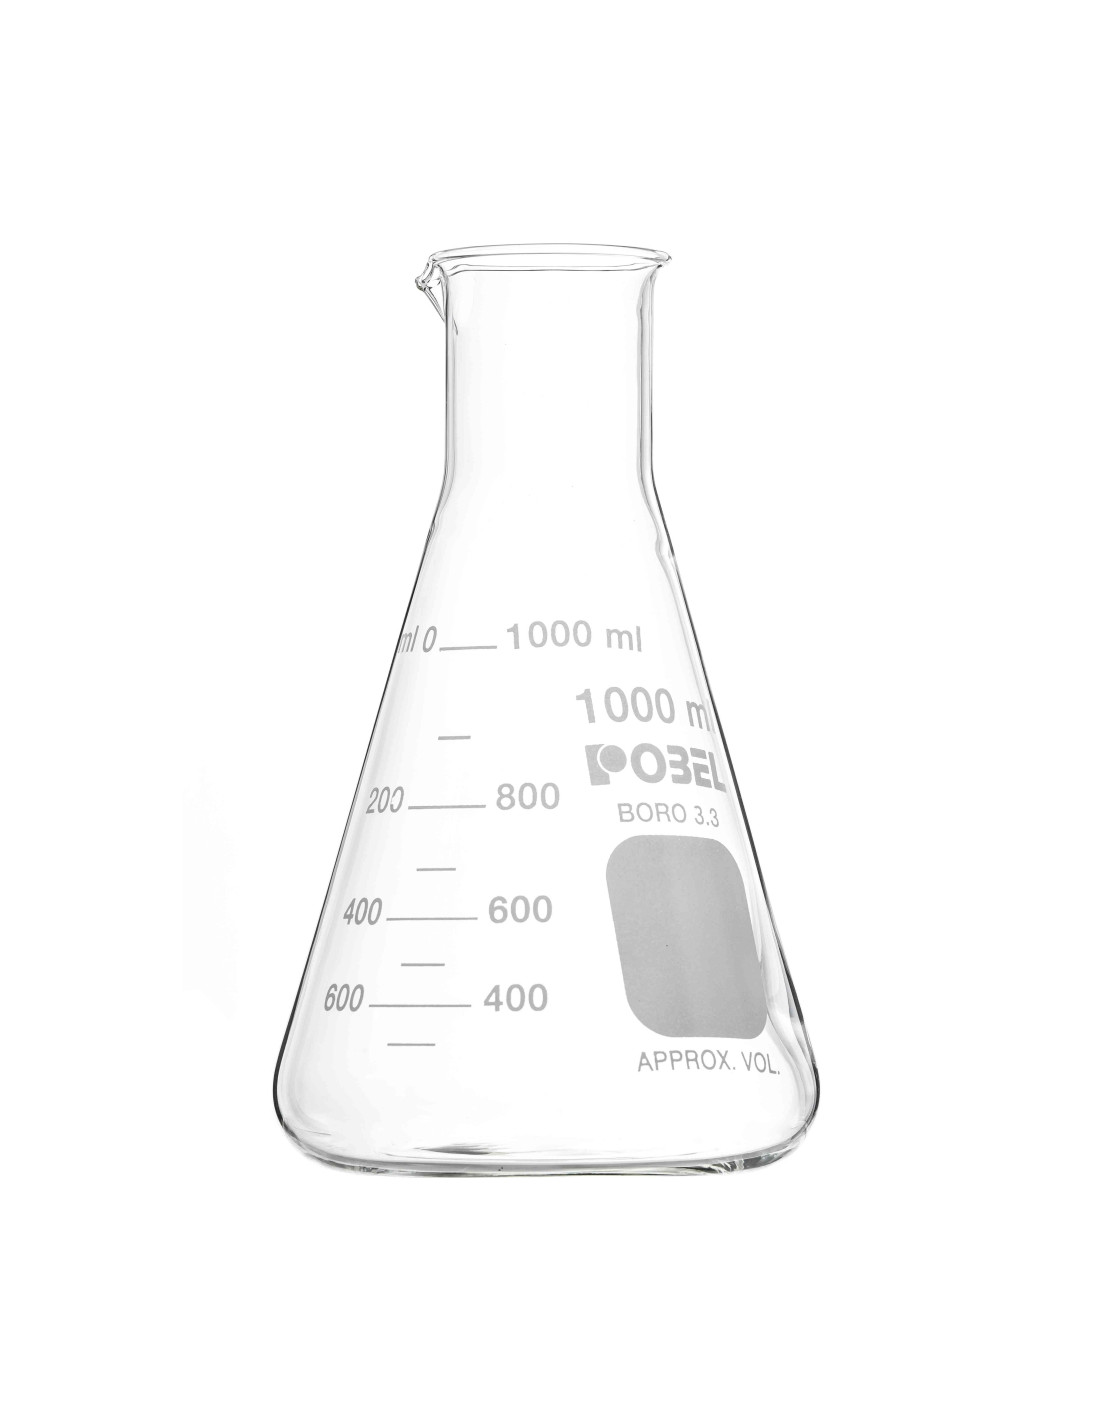 https://pobel.com/3674-thickbox_default/erlenmeyer-flask-wide-mouth-with-spout.jpg